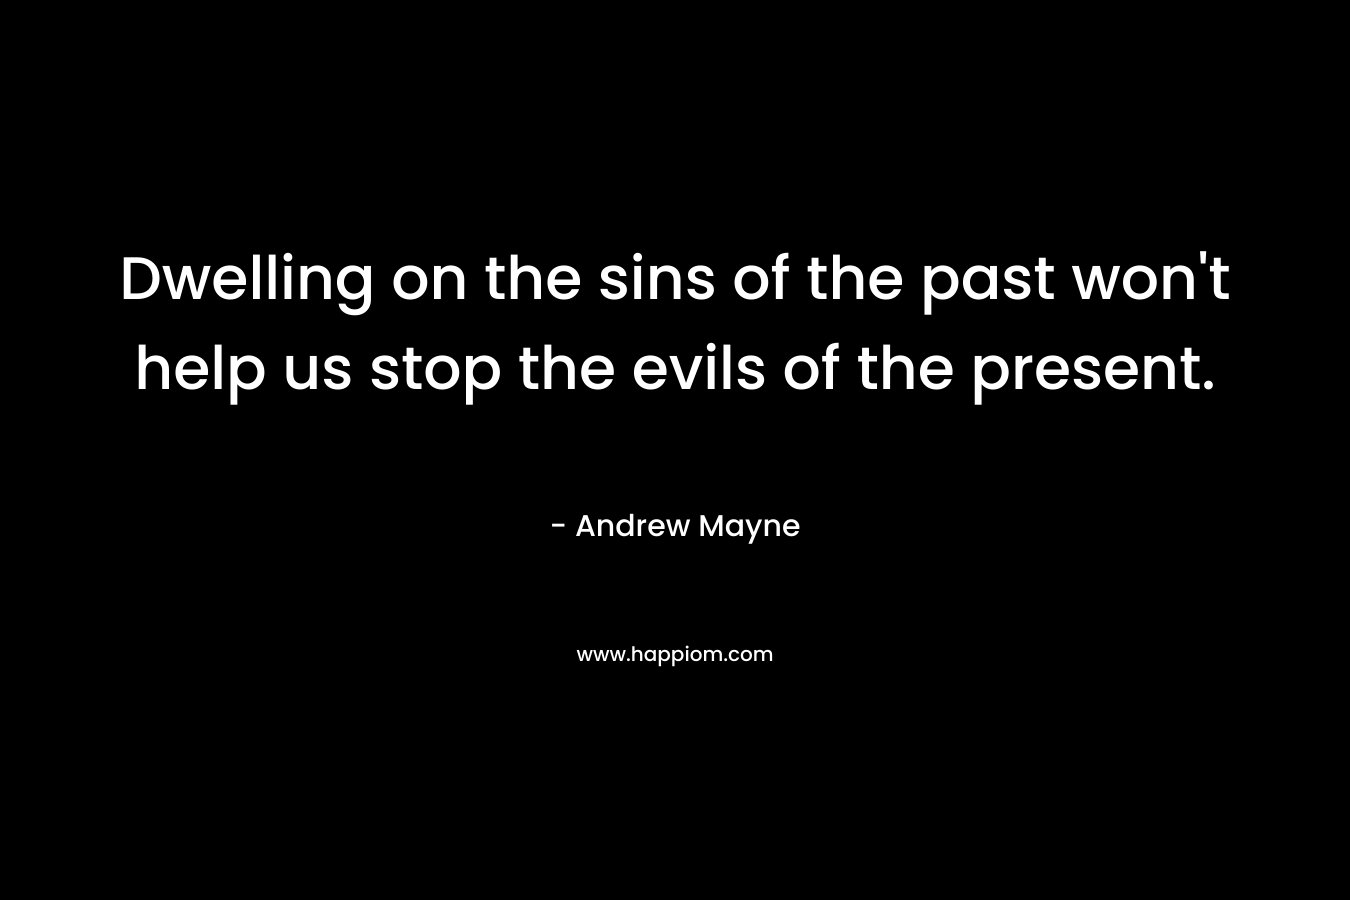 Dwelling on the sins of the past won't help us stop the evils of the present.